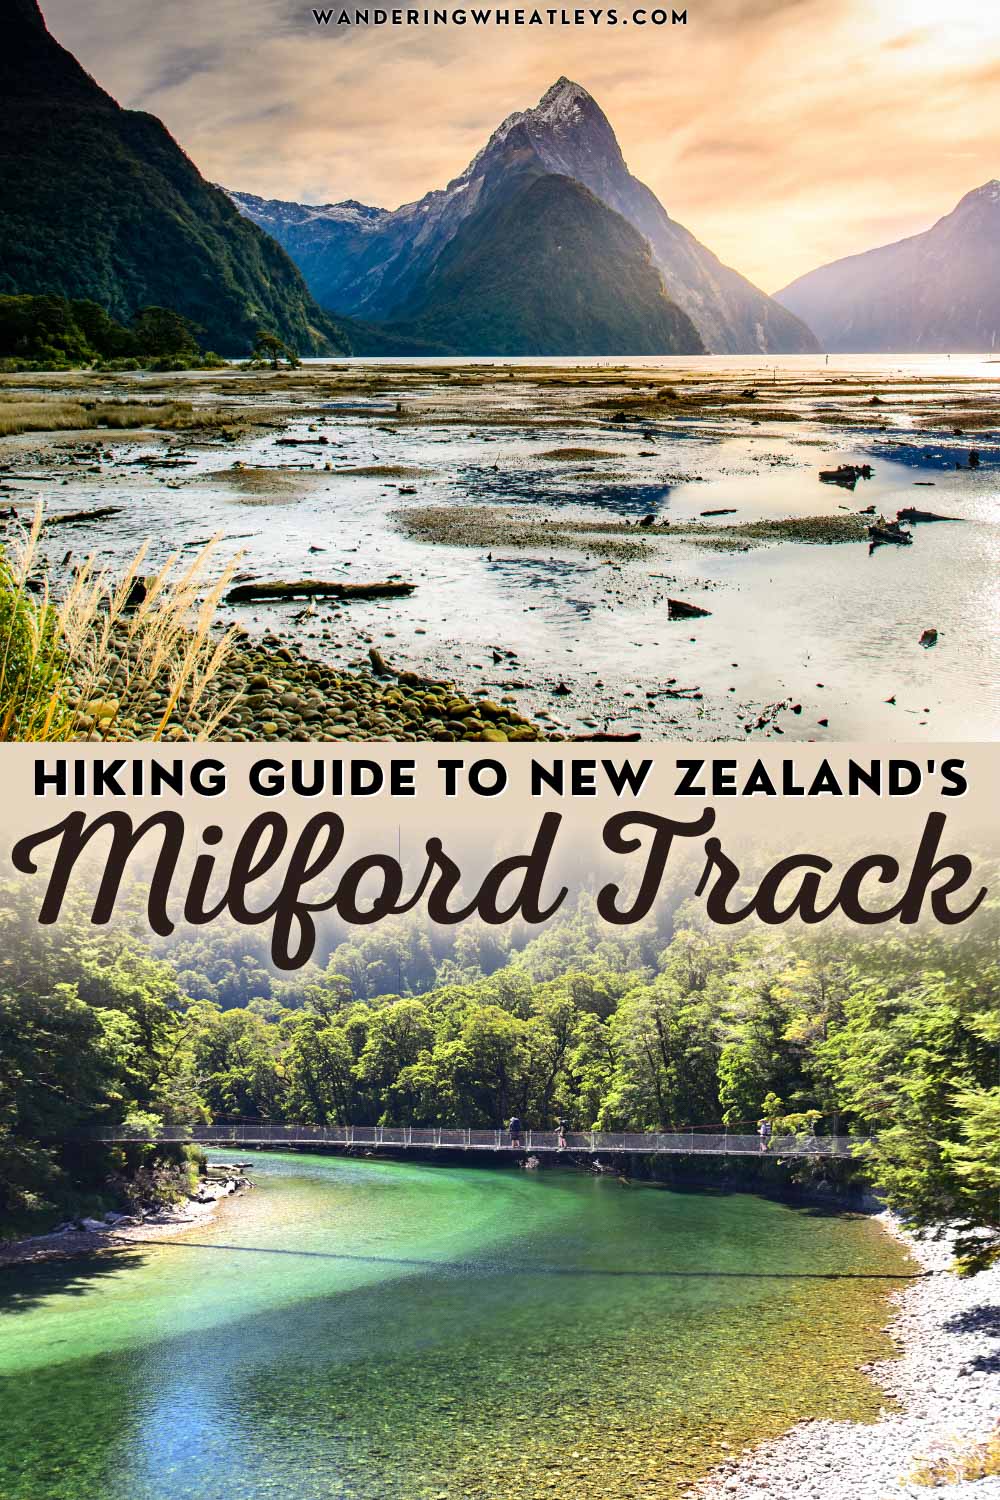 Guide to Hiking the Milford Track in New Zealand